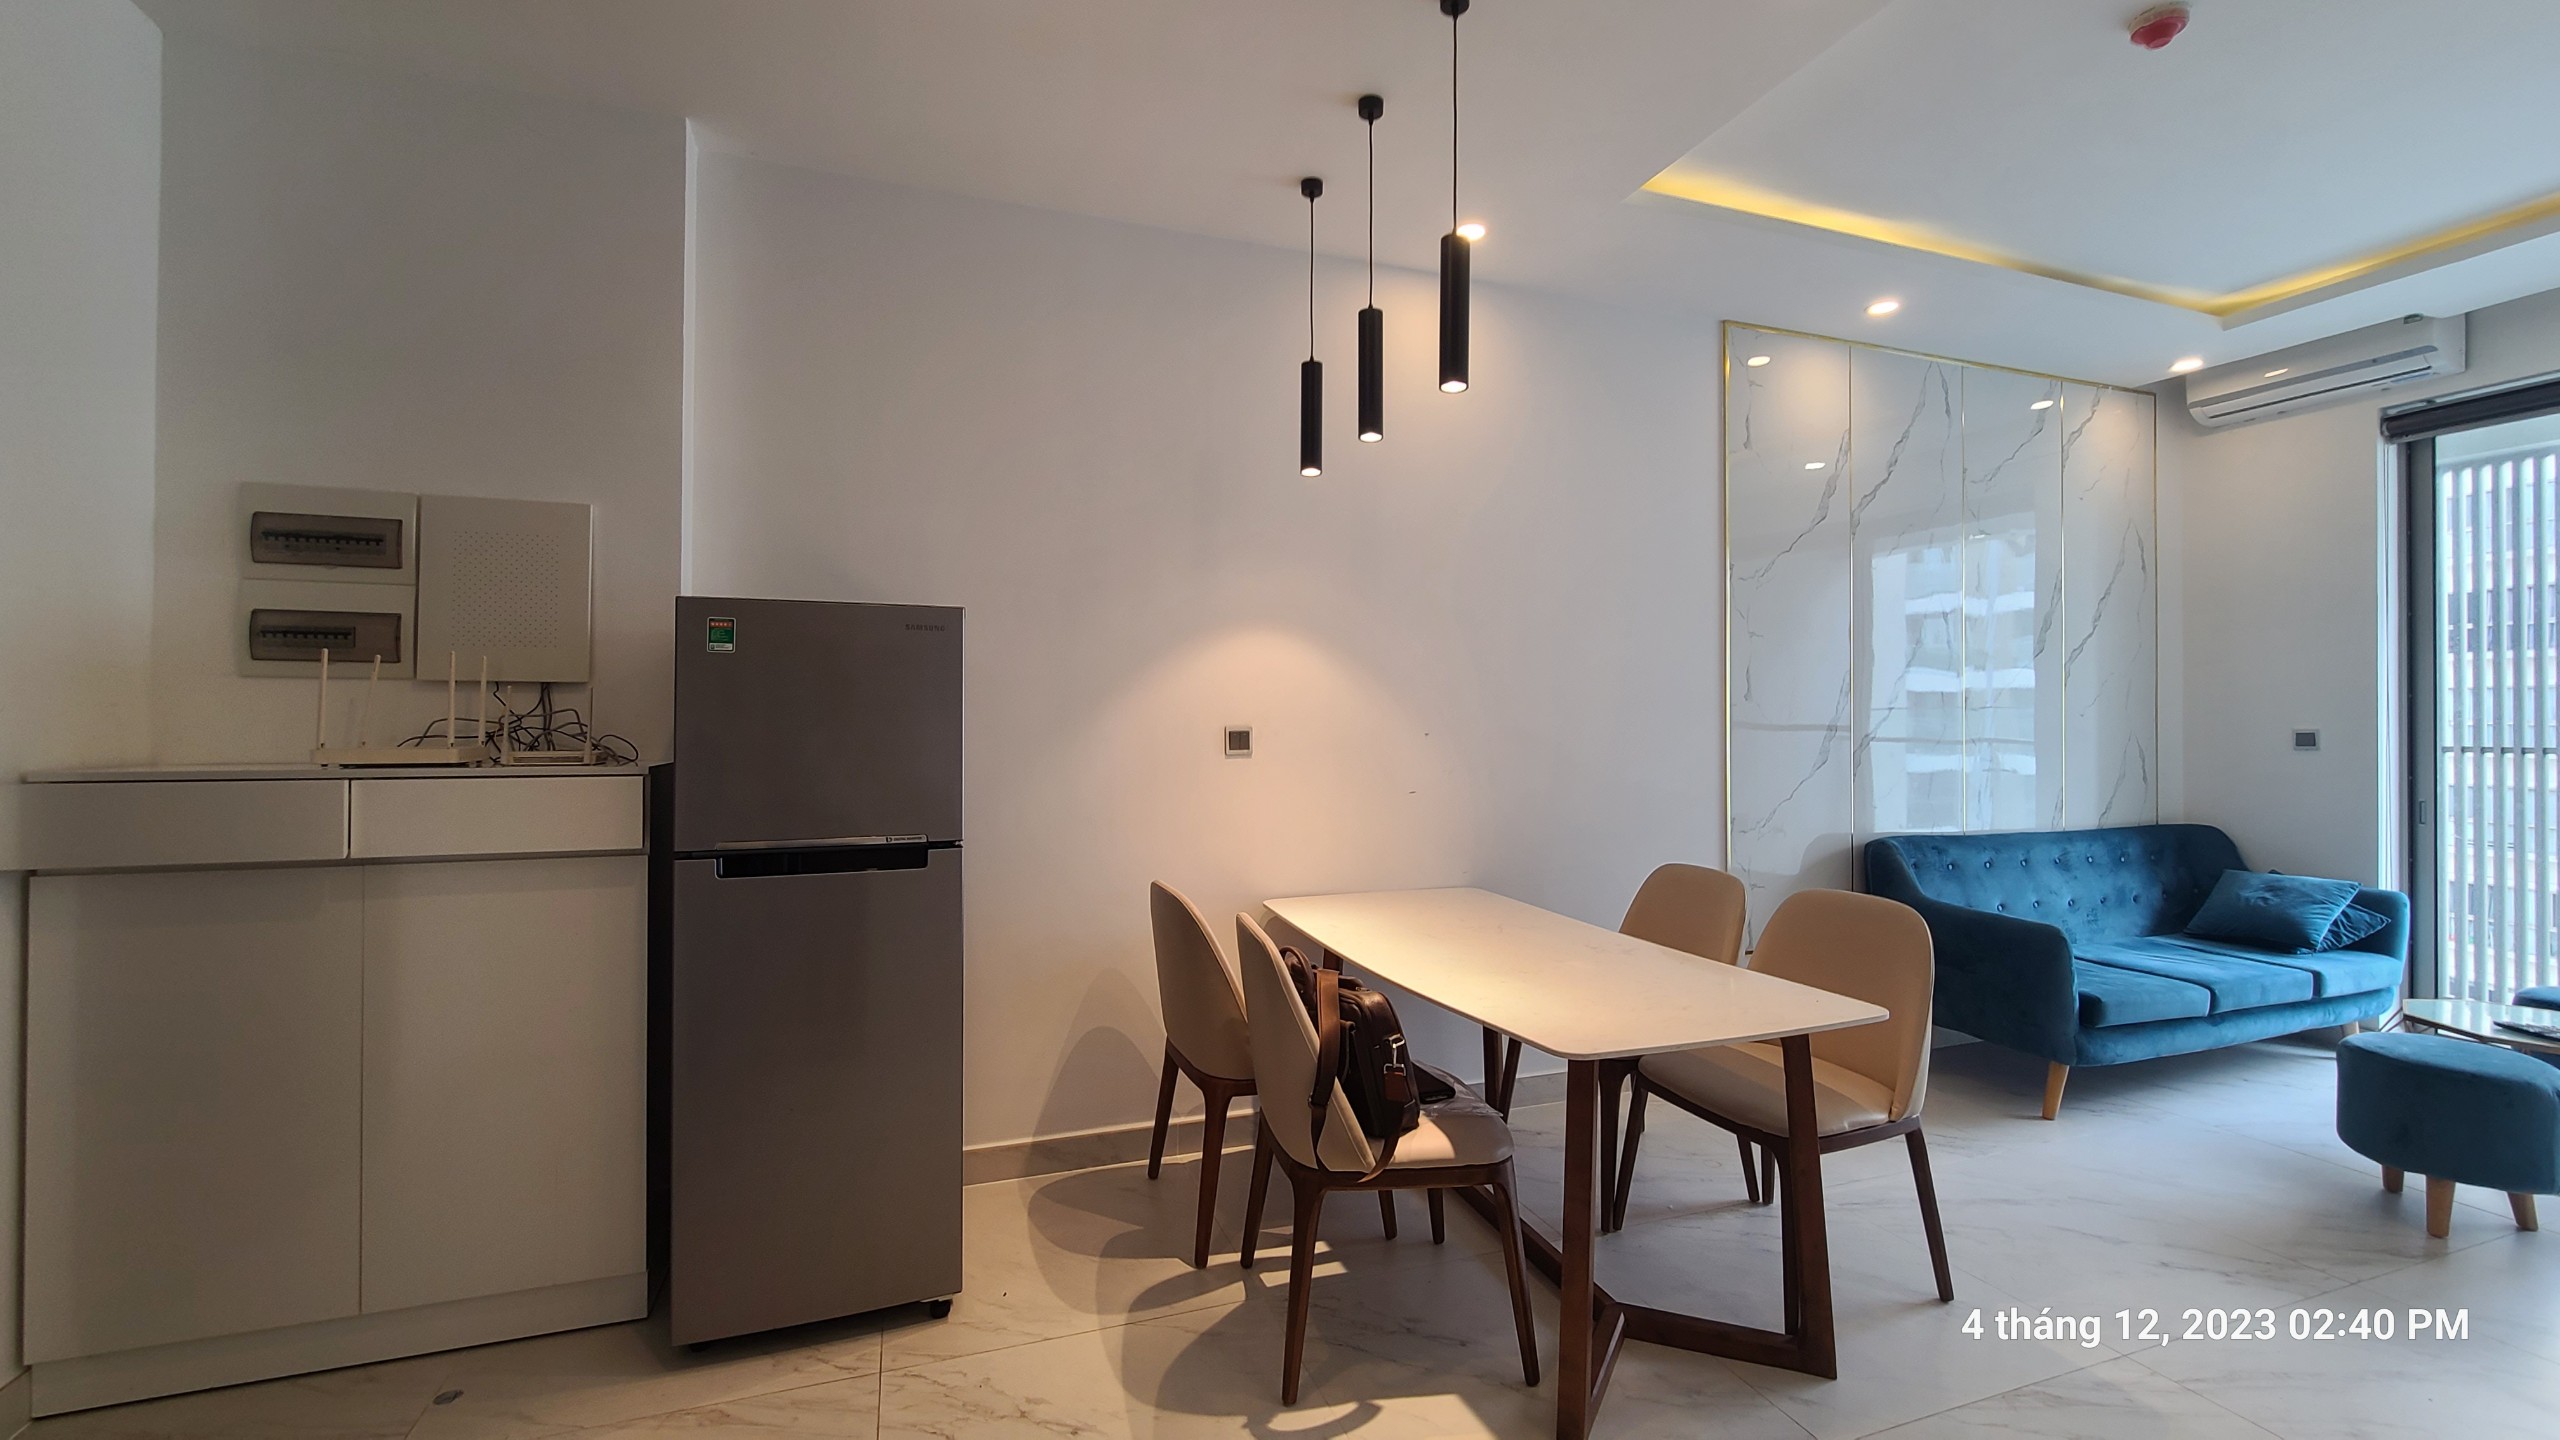 Cheapest Midtown M7 apartment for rent